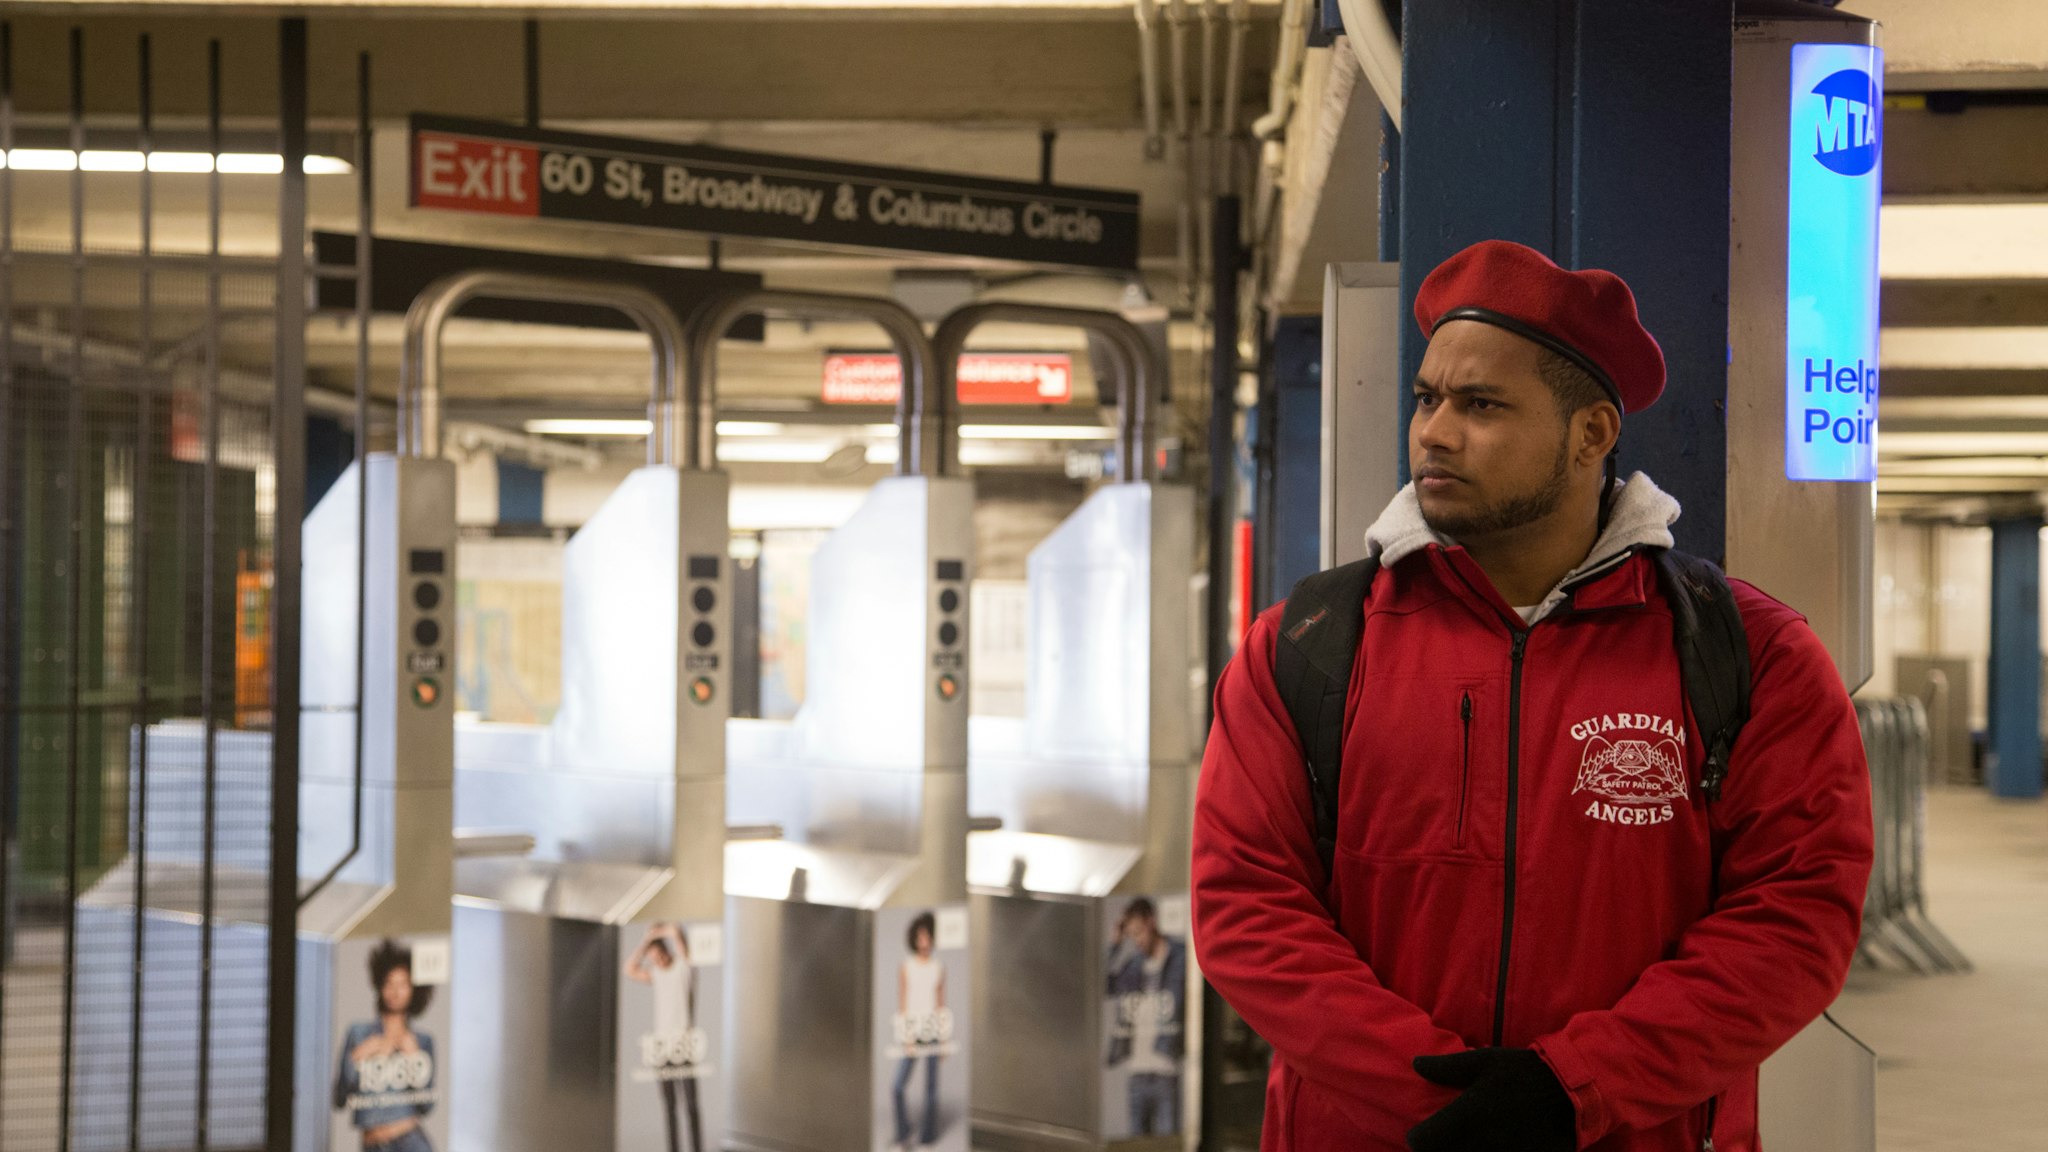 COLUMBUS CIRCLE, NEW YORK CITY, NY, UNITED STATES - 2016/02/02: The Guardian Angels patrol the New York subway at Columbus Circle for the first time in 22 years after a spree of slashing attacks. (Photo by Louise Wateridge/Pacific Press/LightRocket via Getty Images)